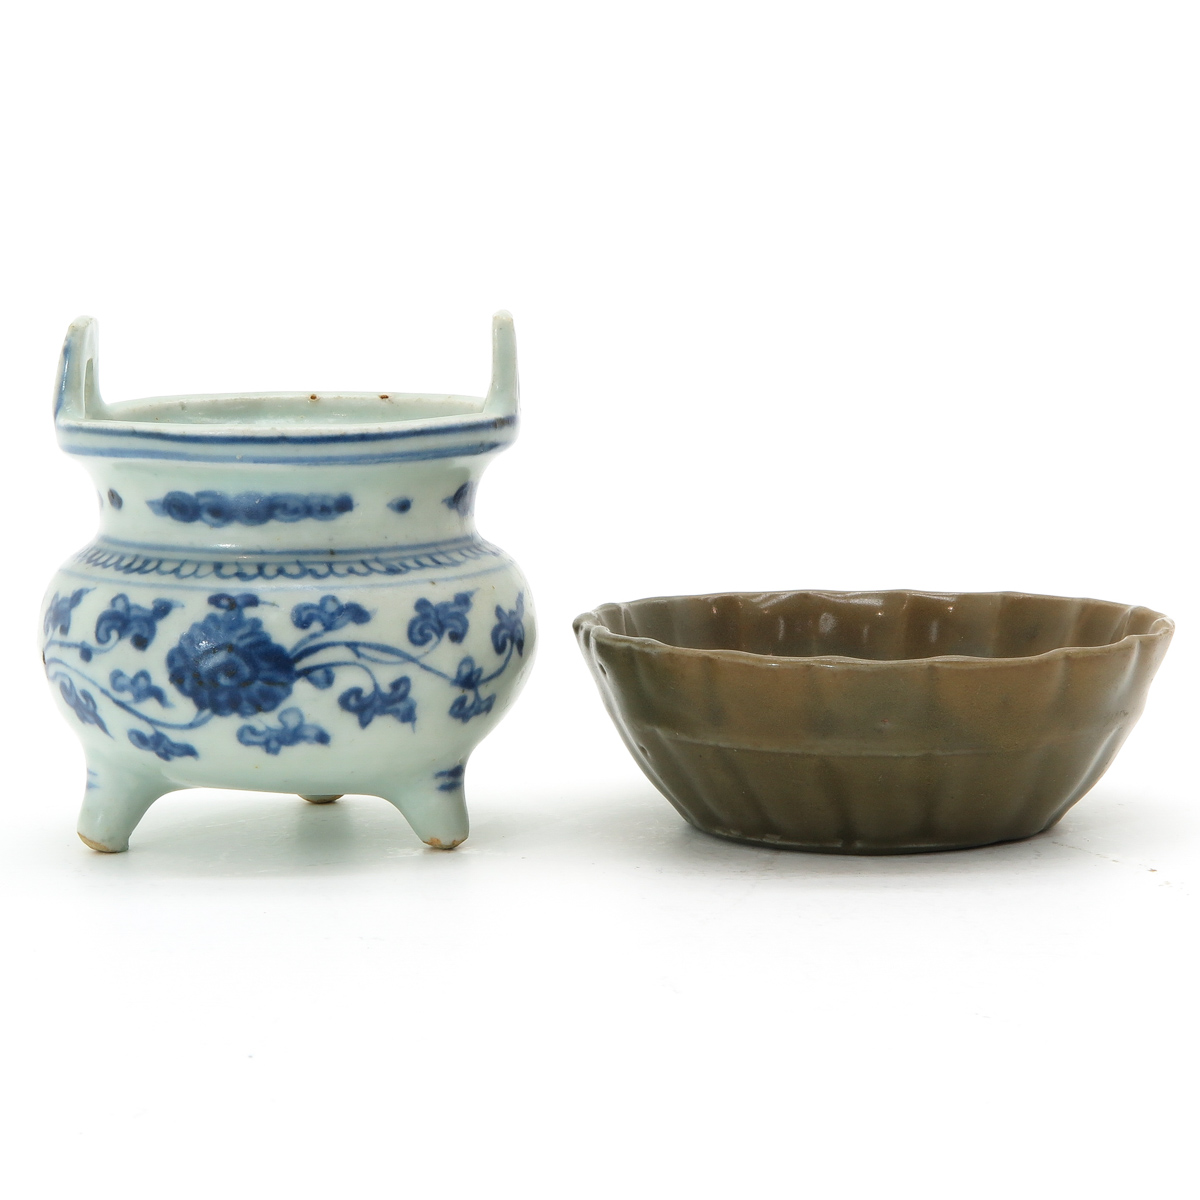 A Blue and White Decor Censer with Celadon Tray